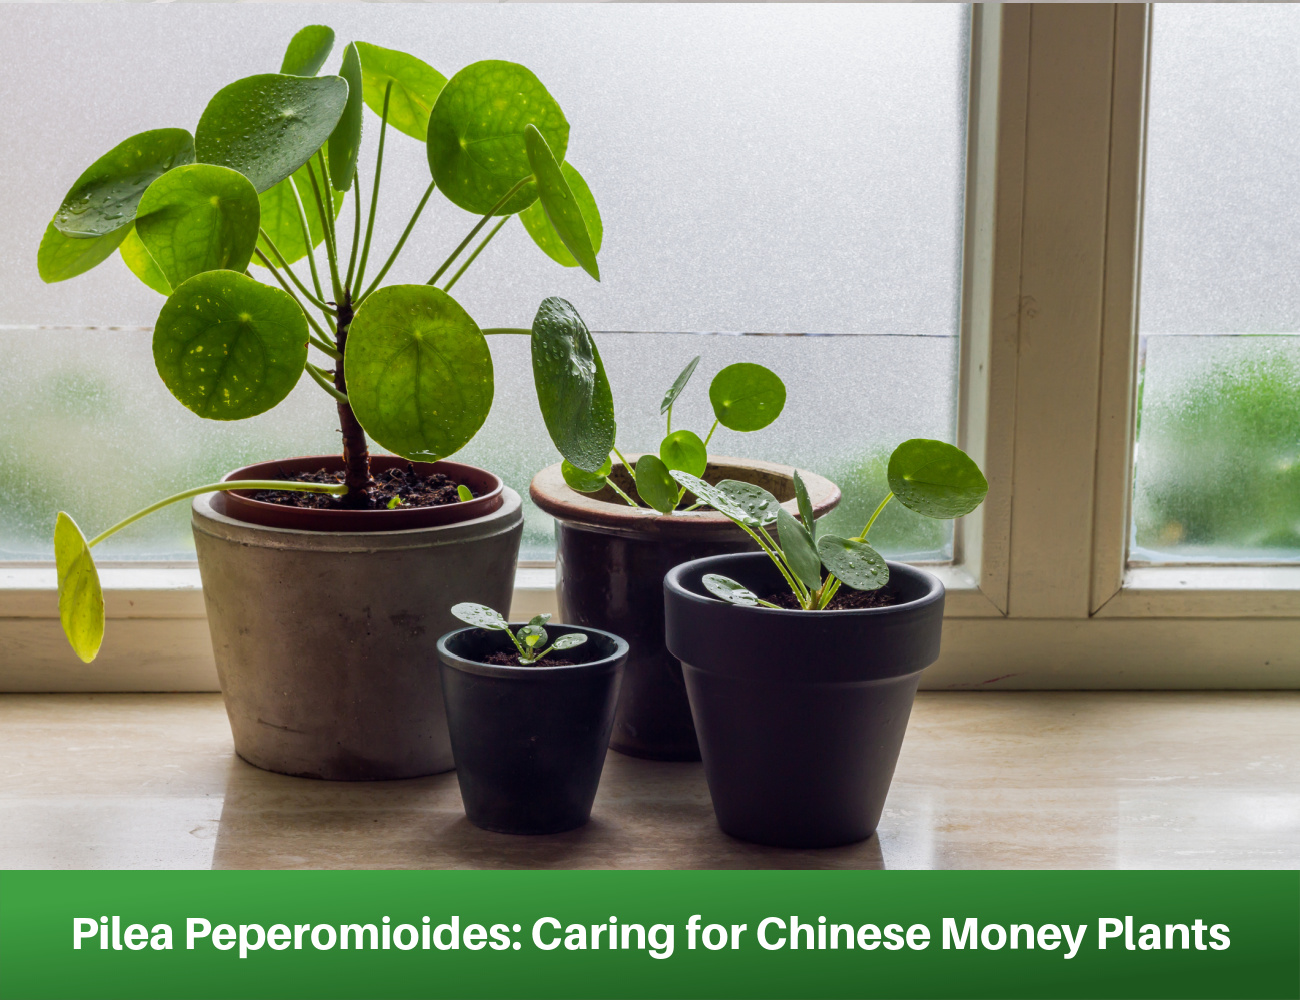 Pilea Peperomioides: Caring for Chinese Money Plants